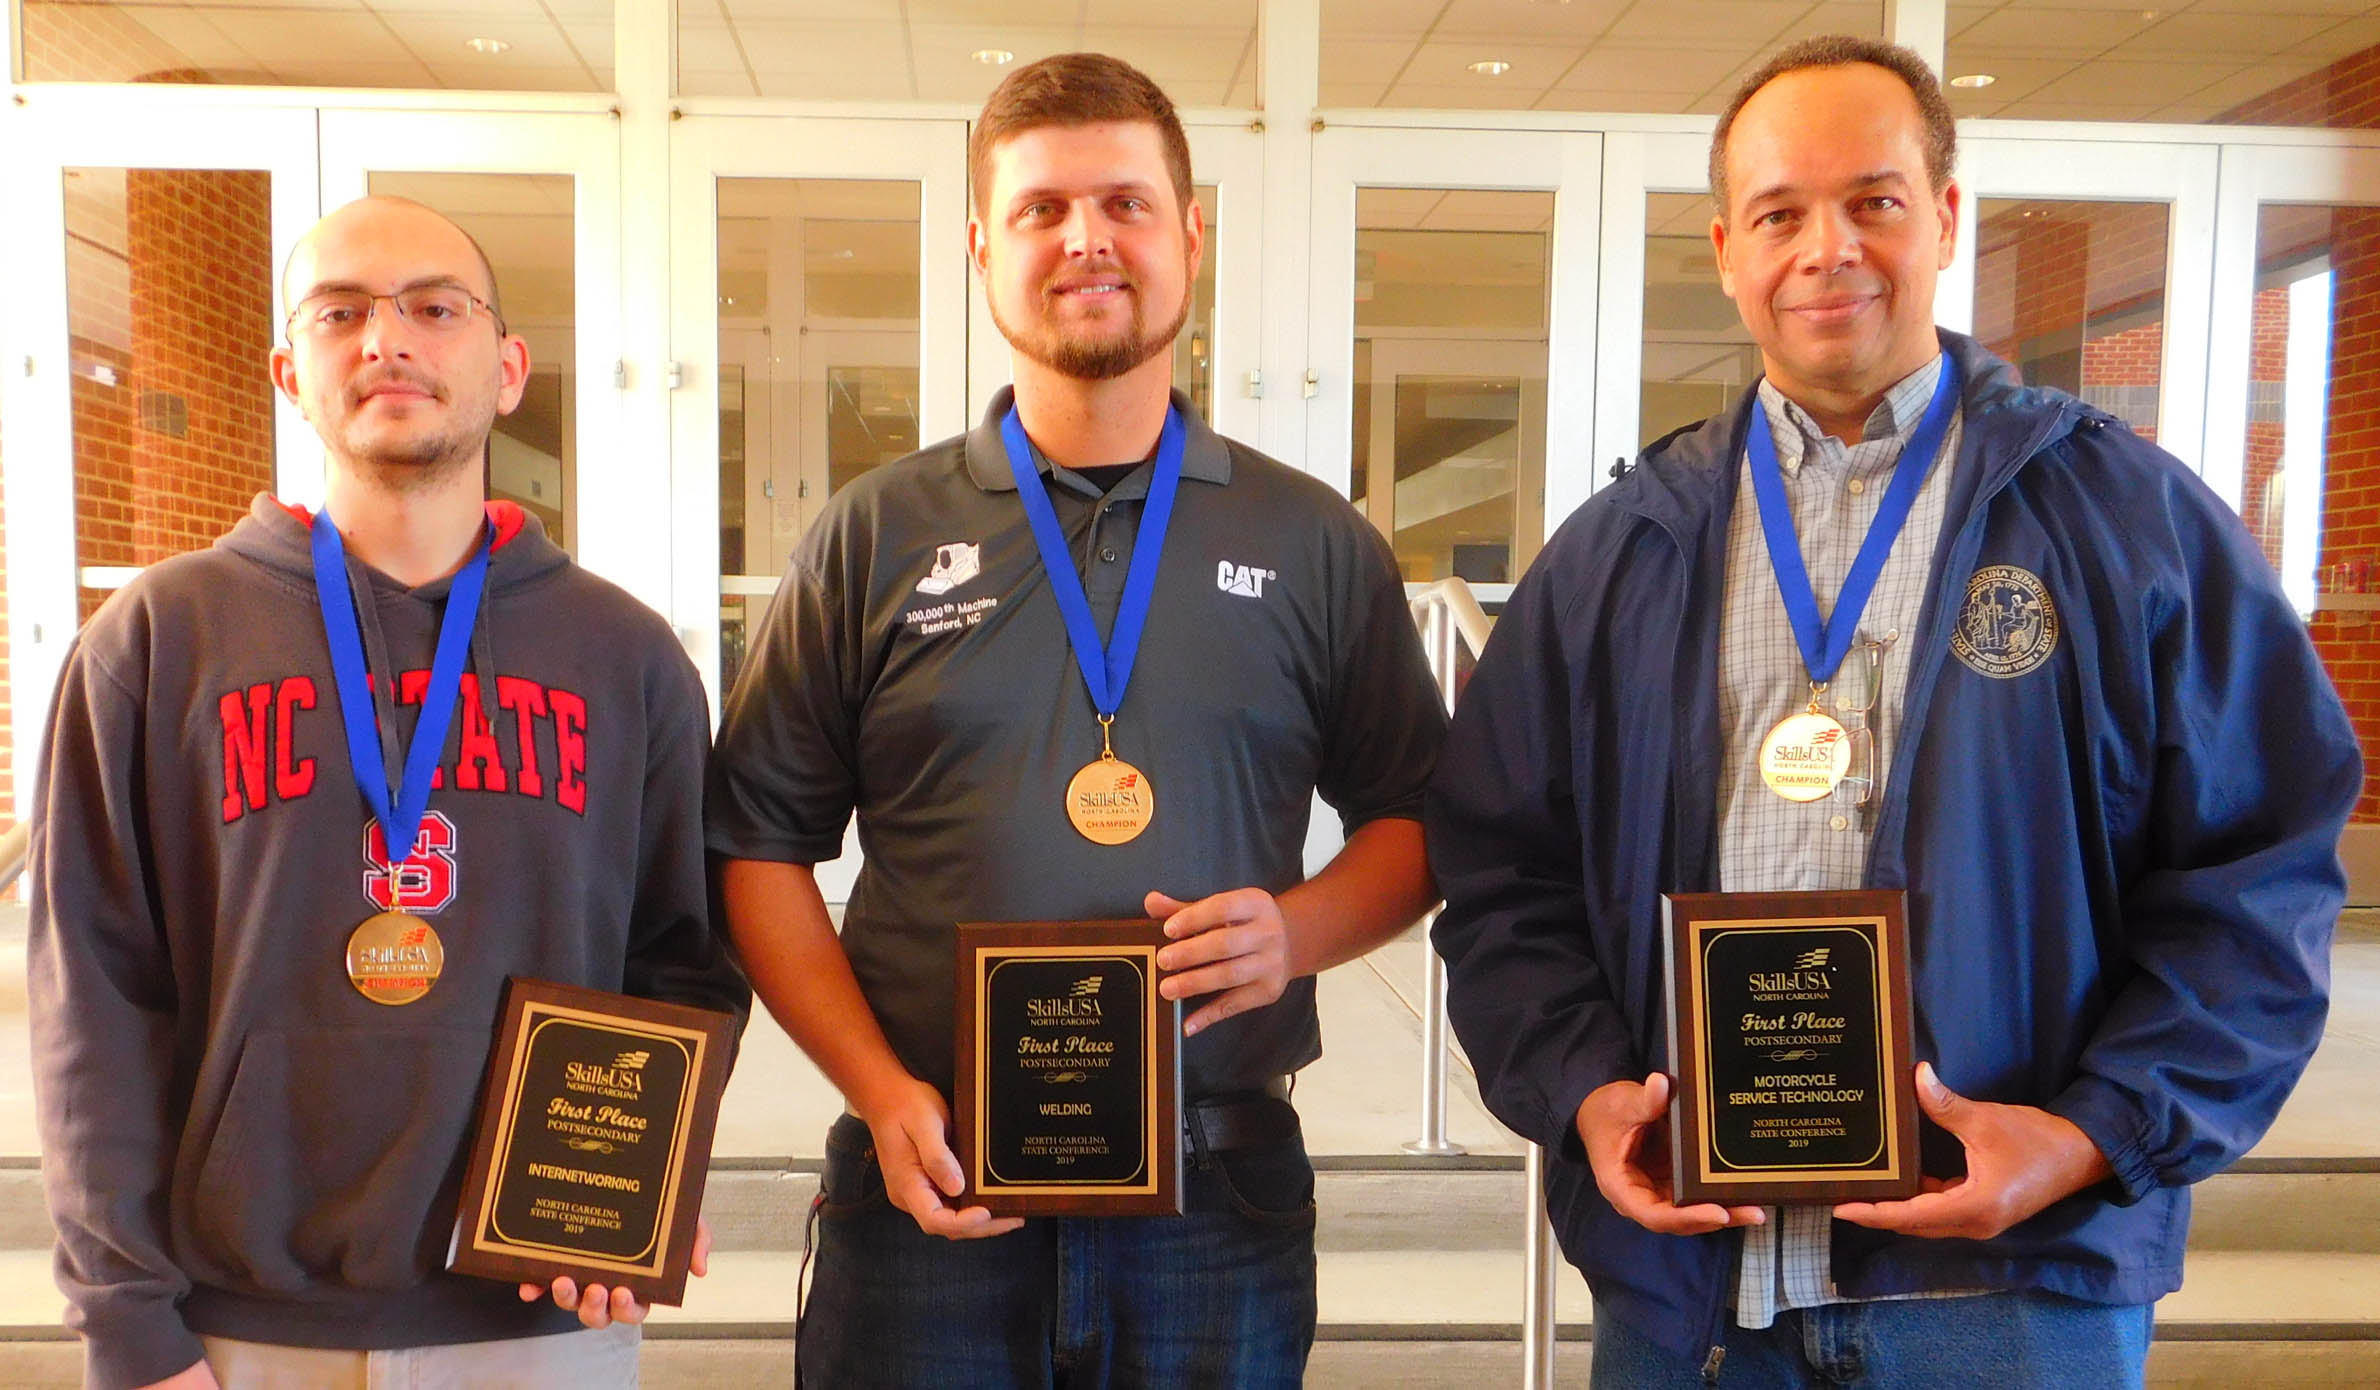 CCCC students compete in SkillsUSA state event